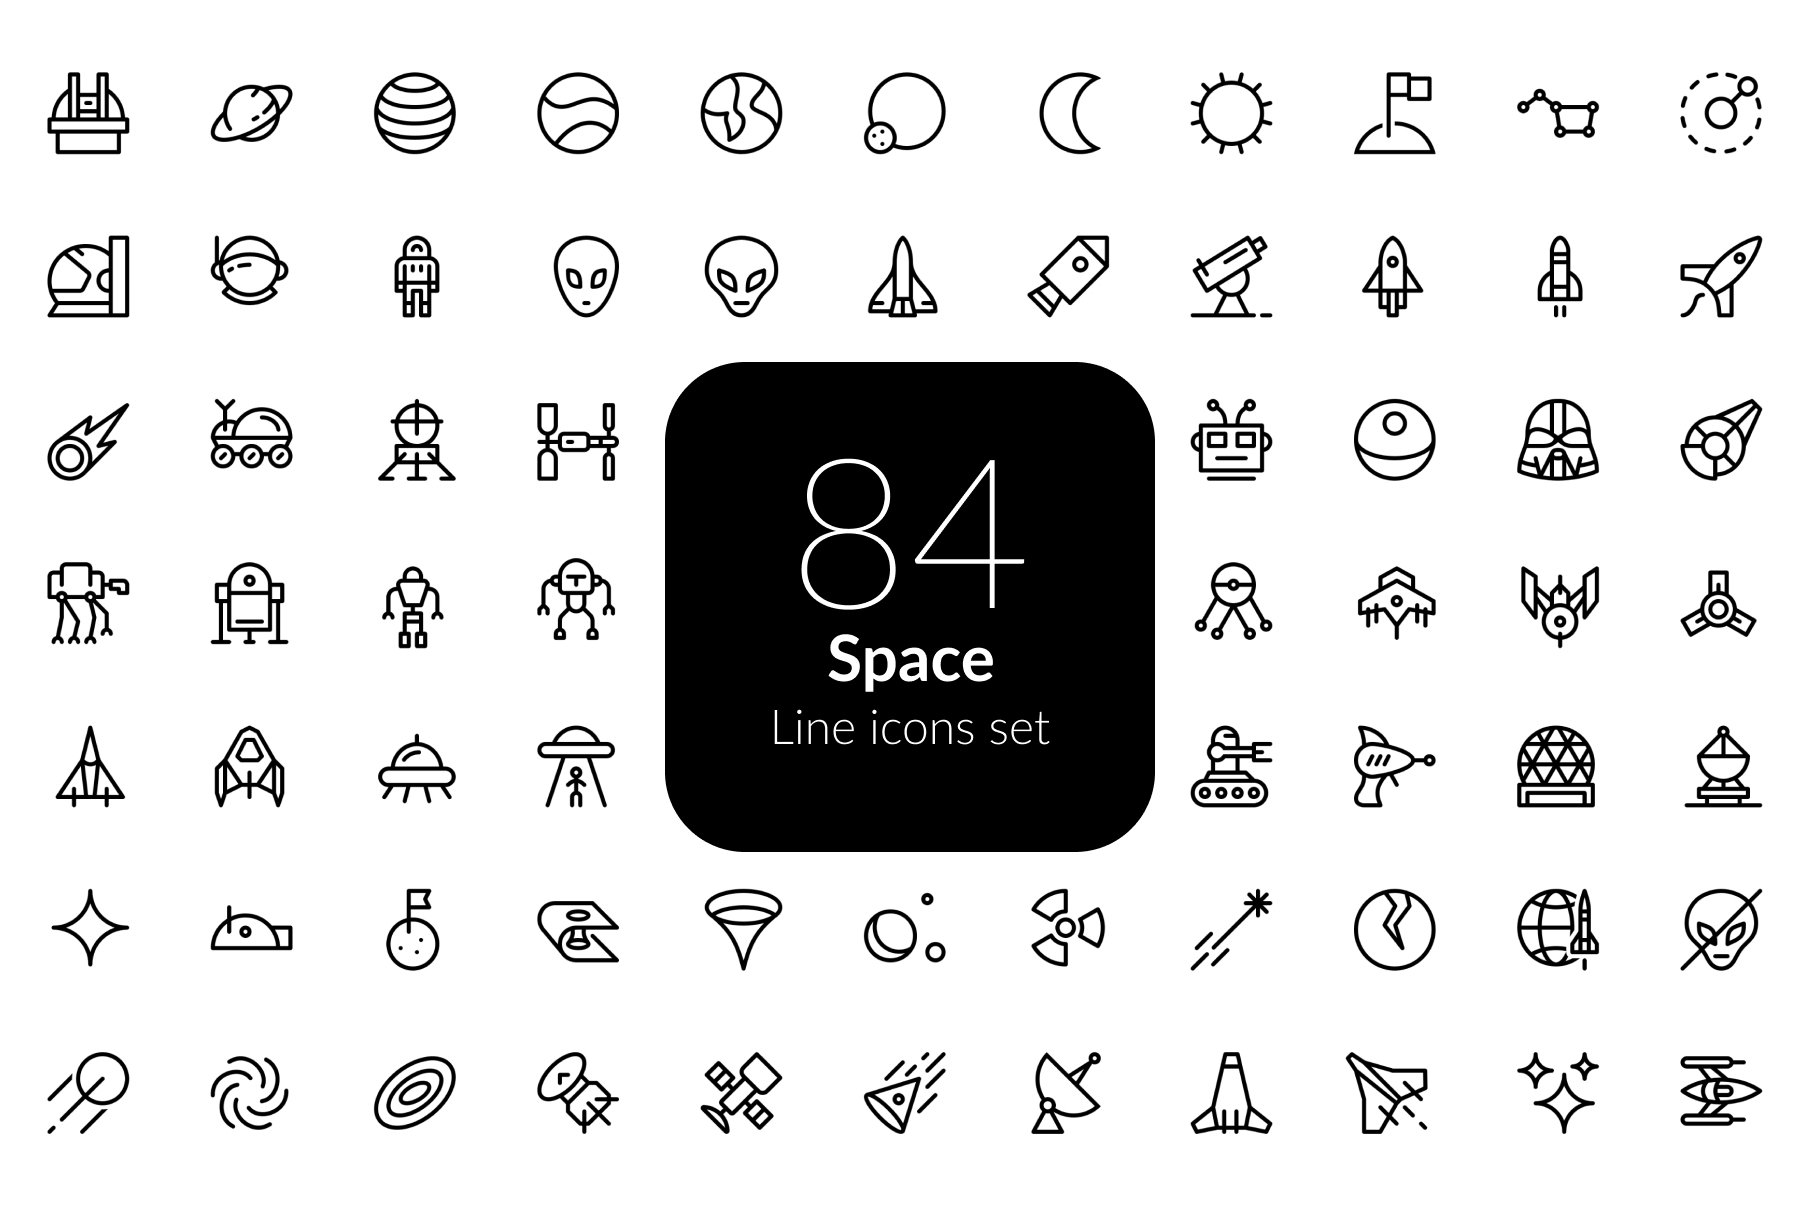 Space line icons set cover image.